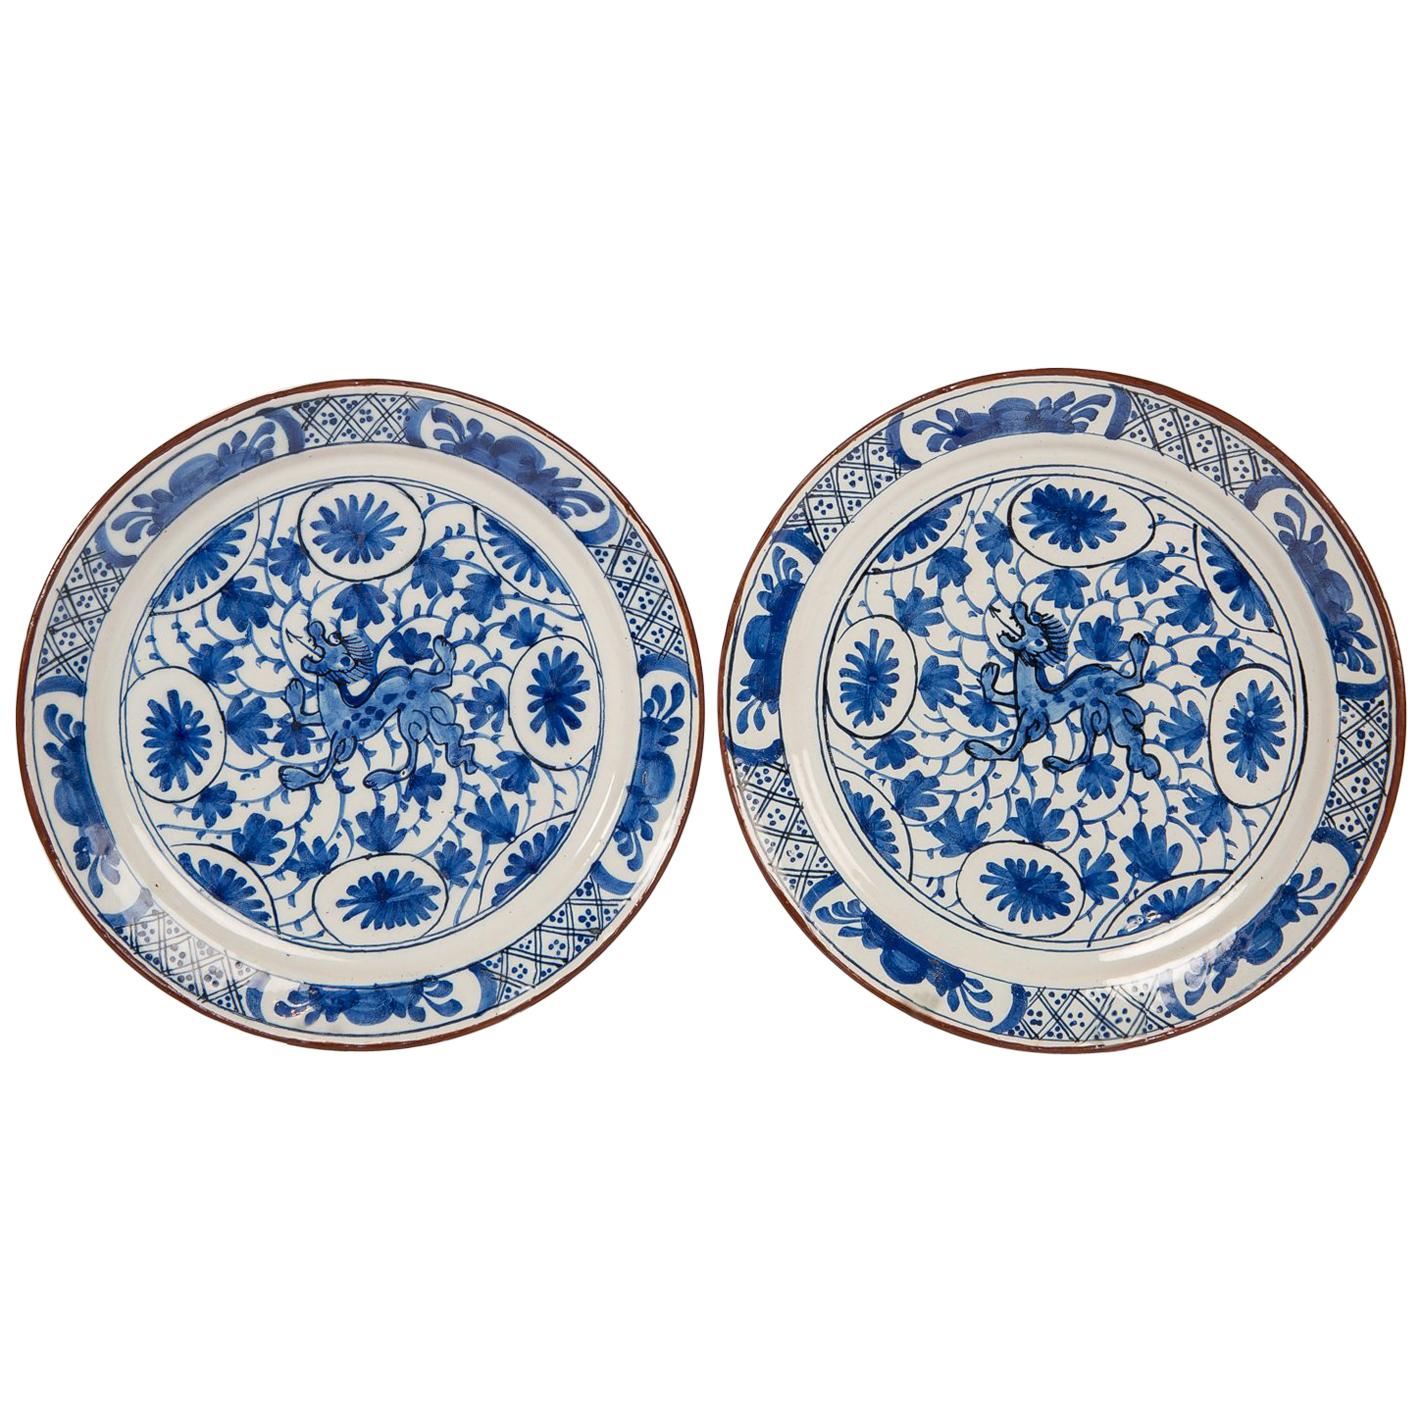 Pair Delft  Blue and White Plates with Dragons Made in Netherlands circa 1780